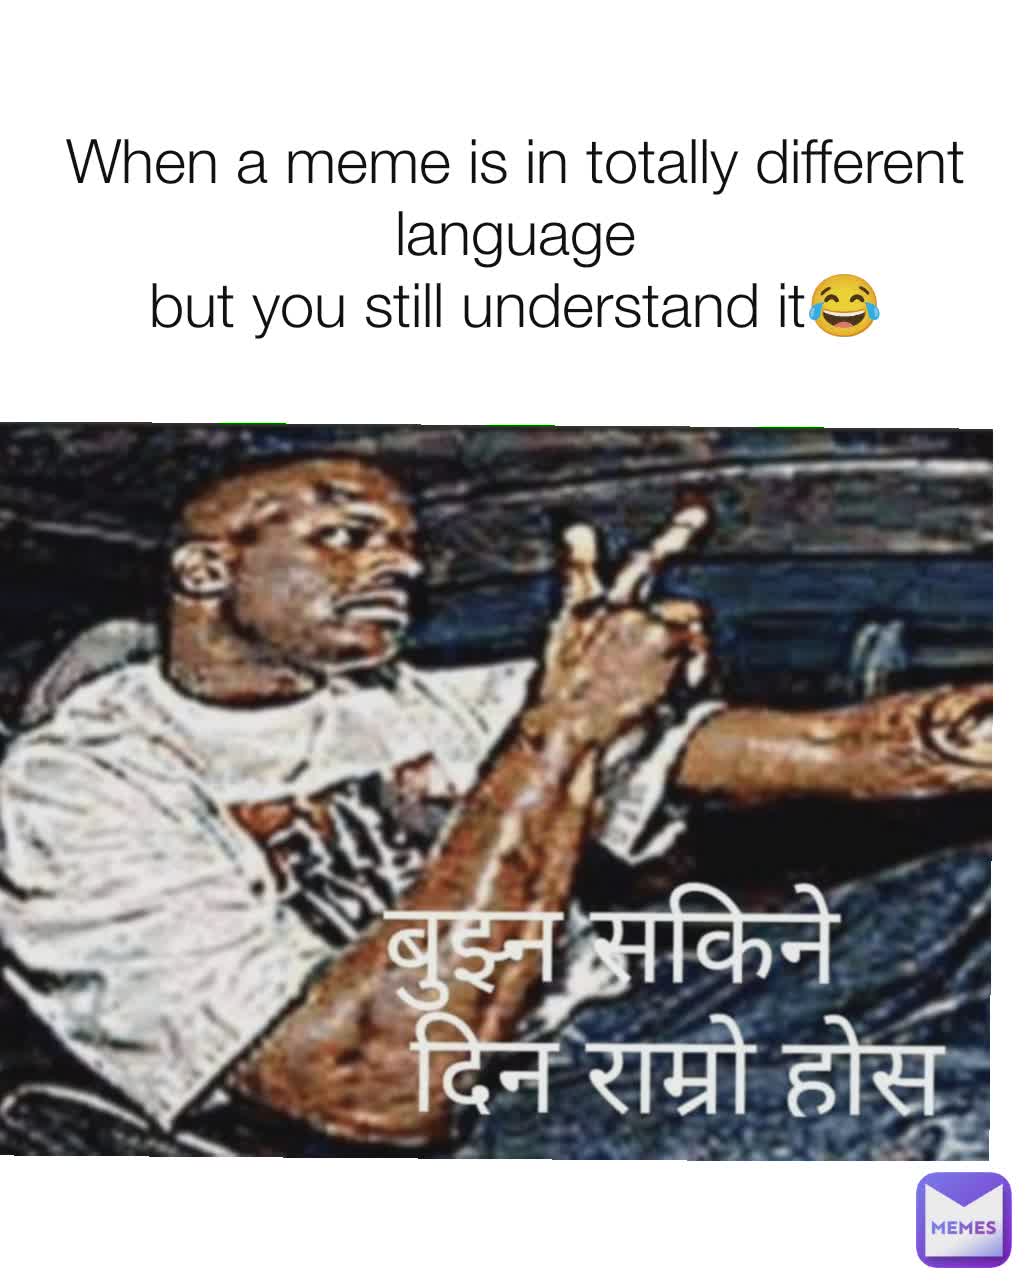 When a meme is in totally different language
but you still understand it😂